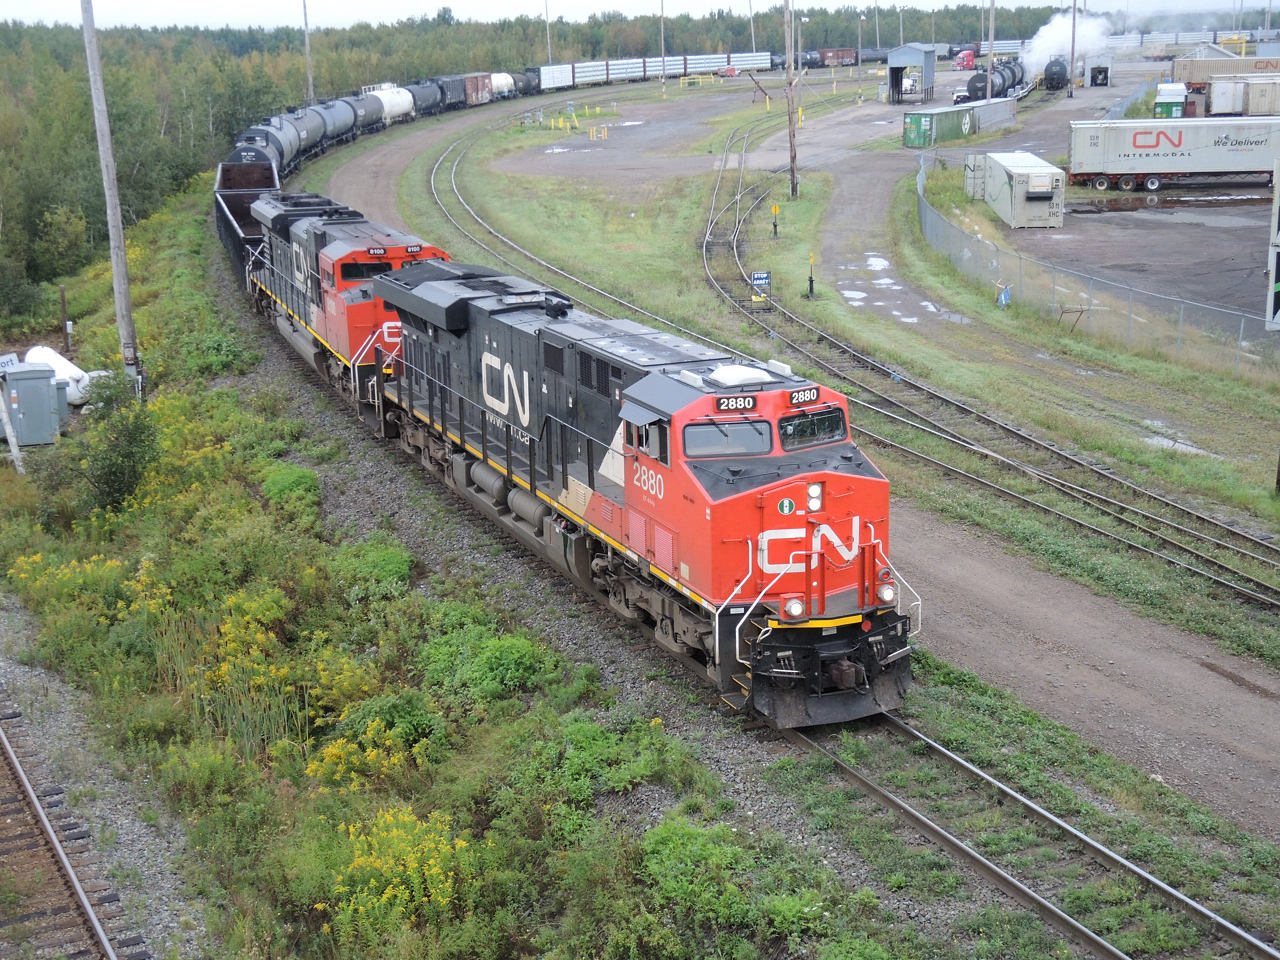 Road crew picked up cars from Moncton yard doubling back onto to train.